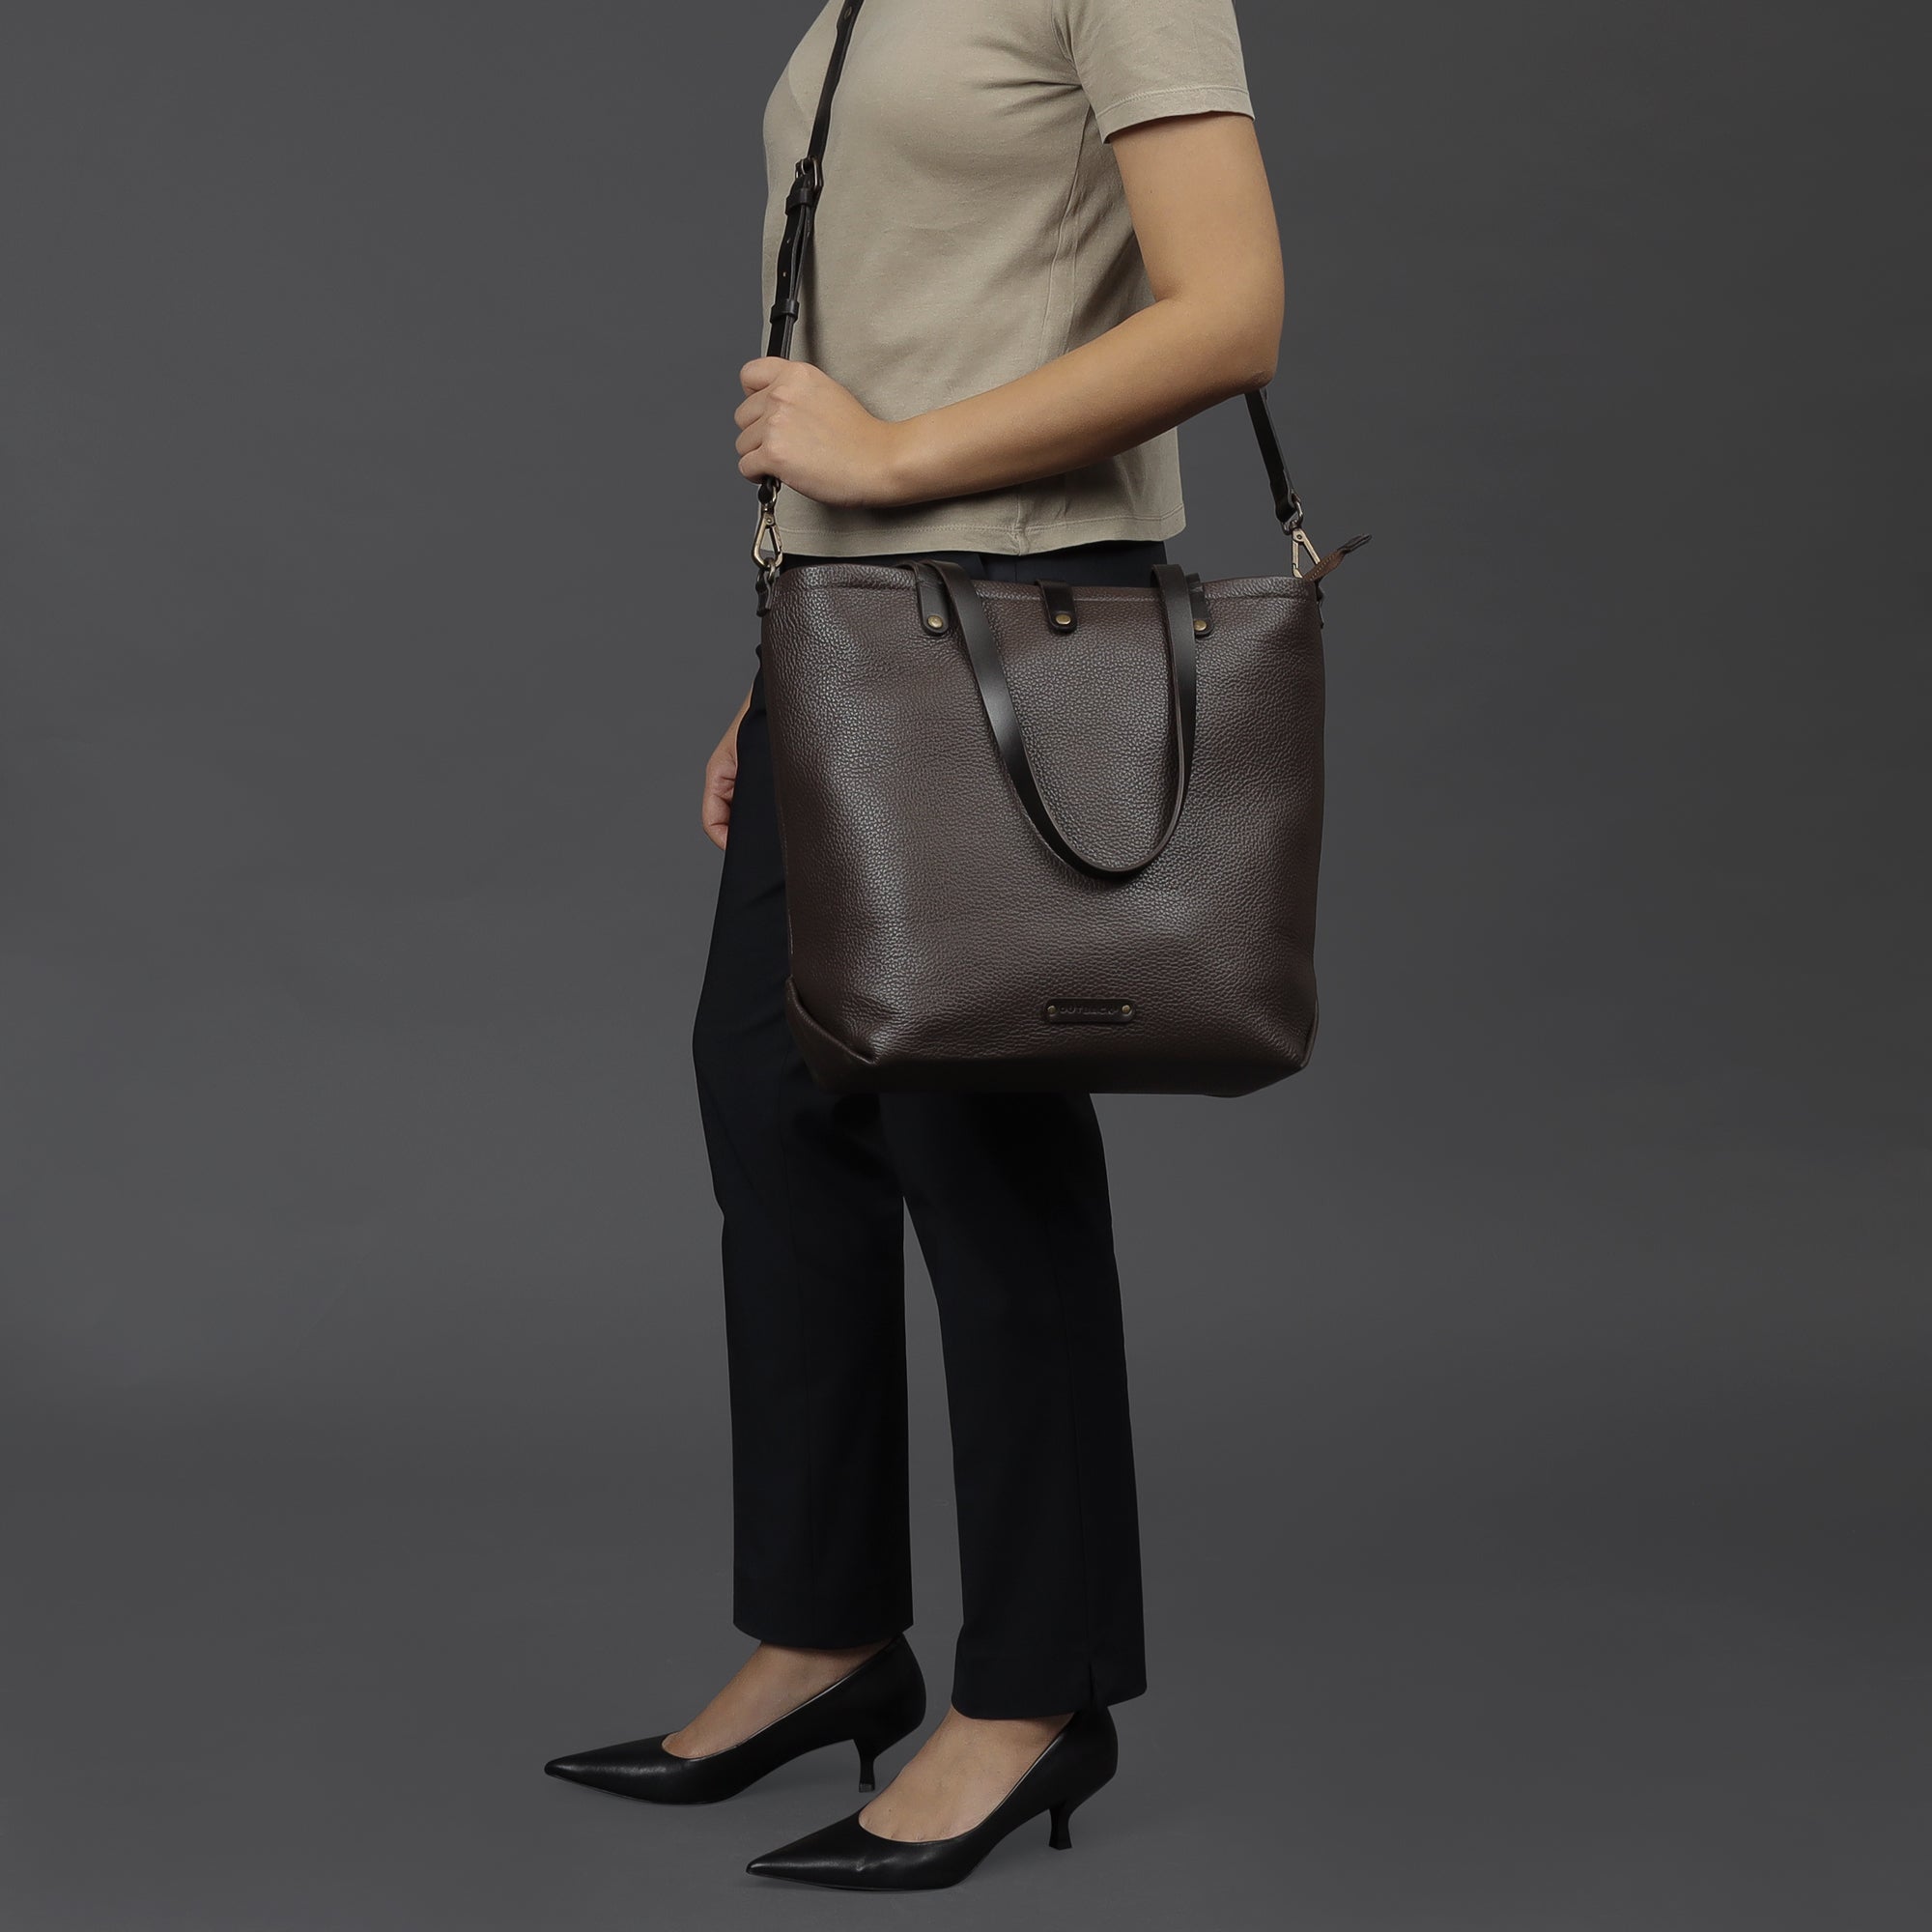 Leather canvas tote for working women